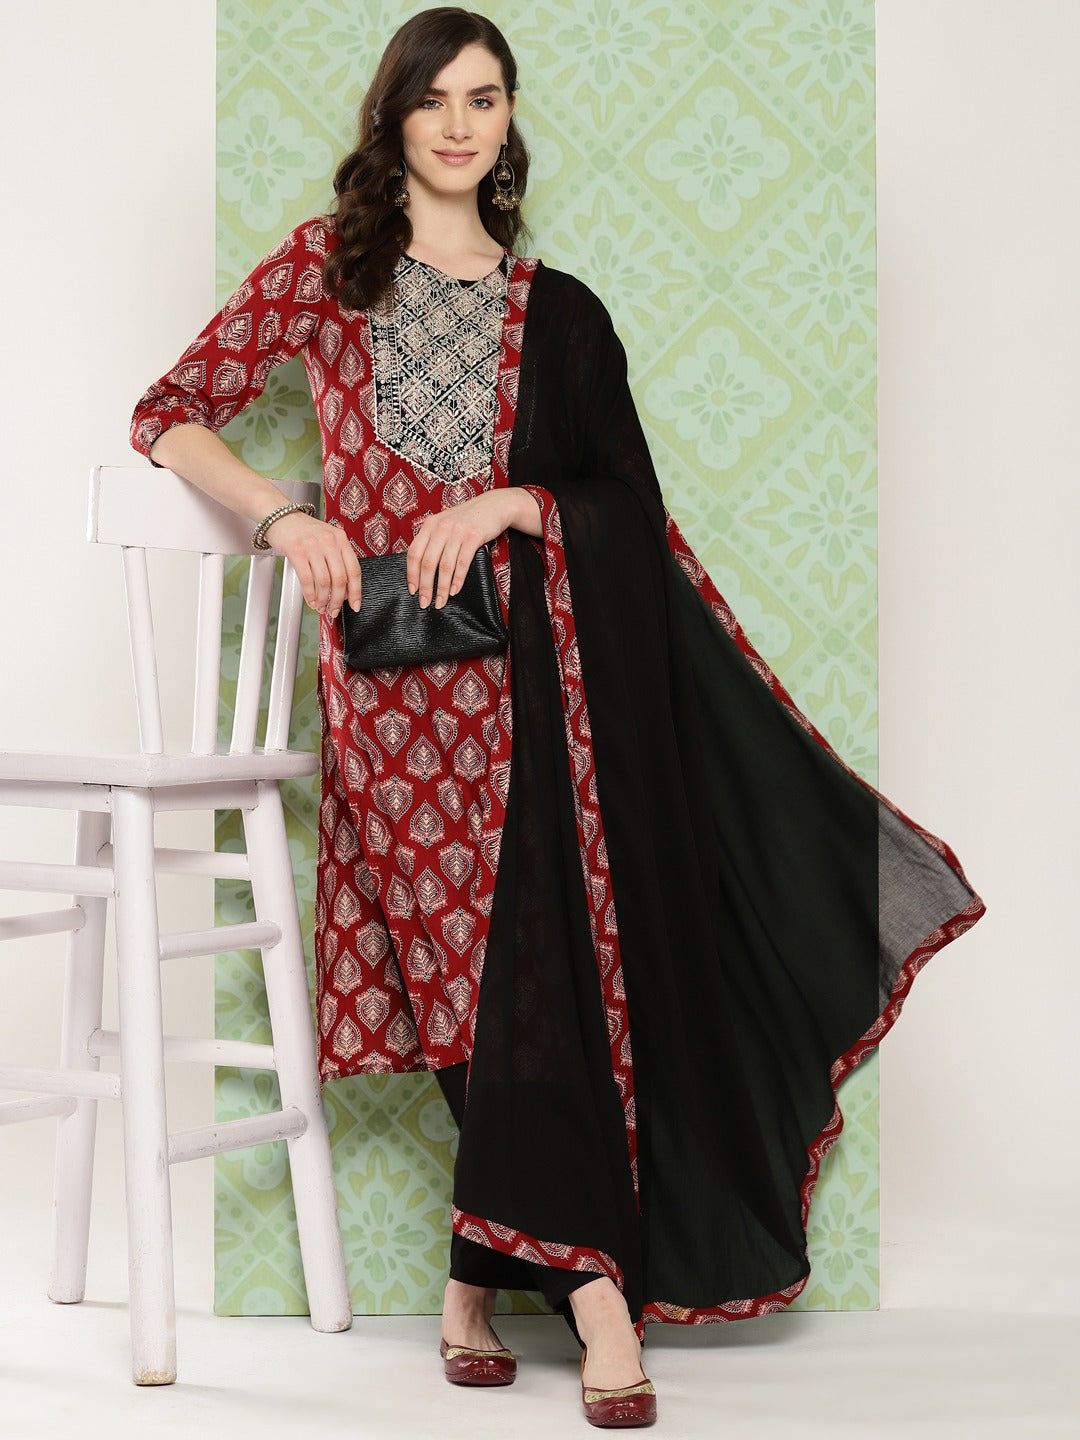 Red Ethnic Motifs Printed Regular Pure Cotton Kurta with Trousers & With Dupatta Set-Yufta Store-1392SKDRDS